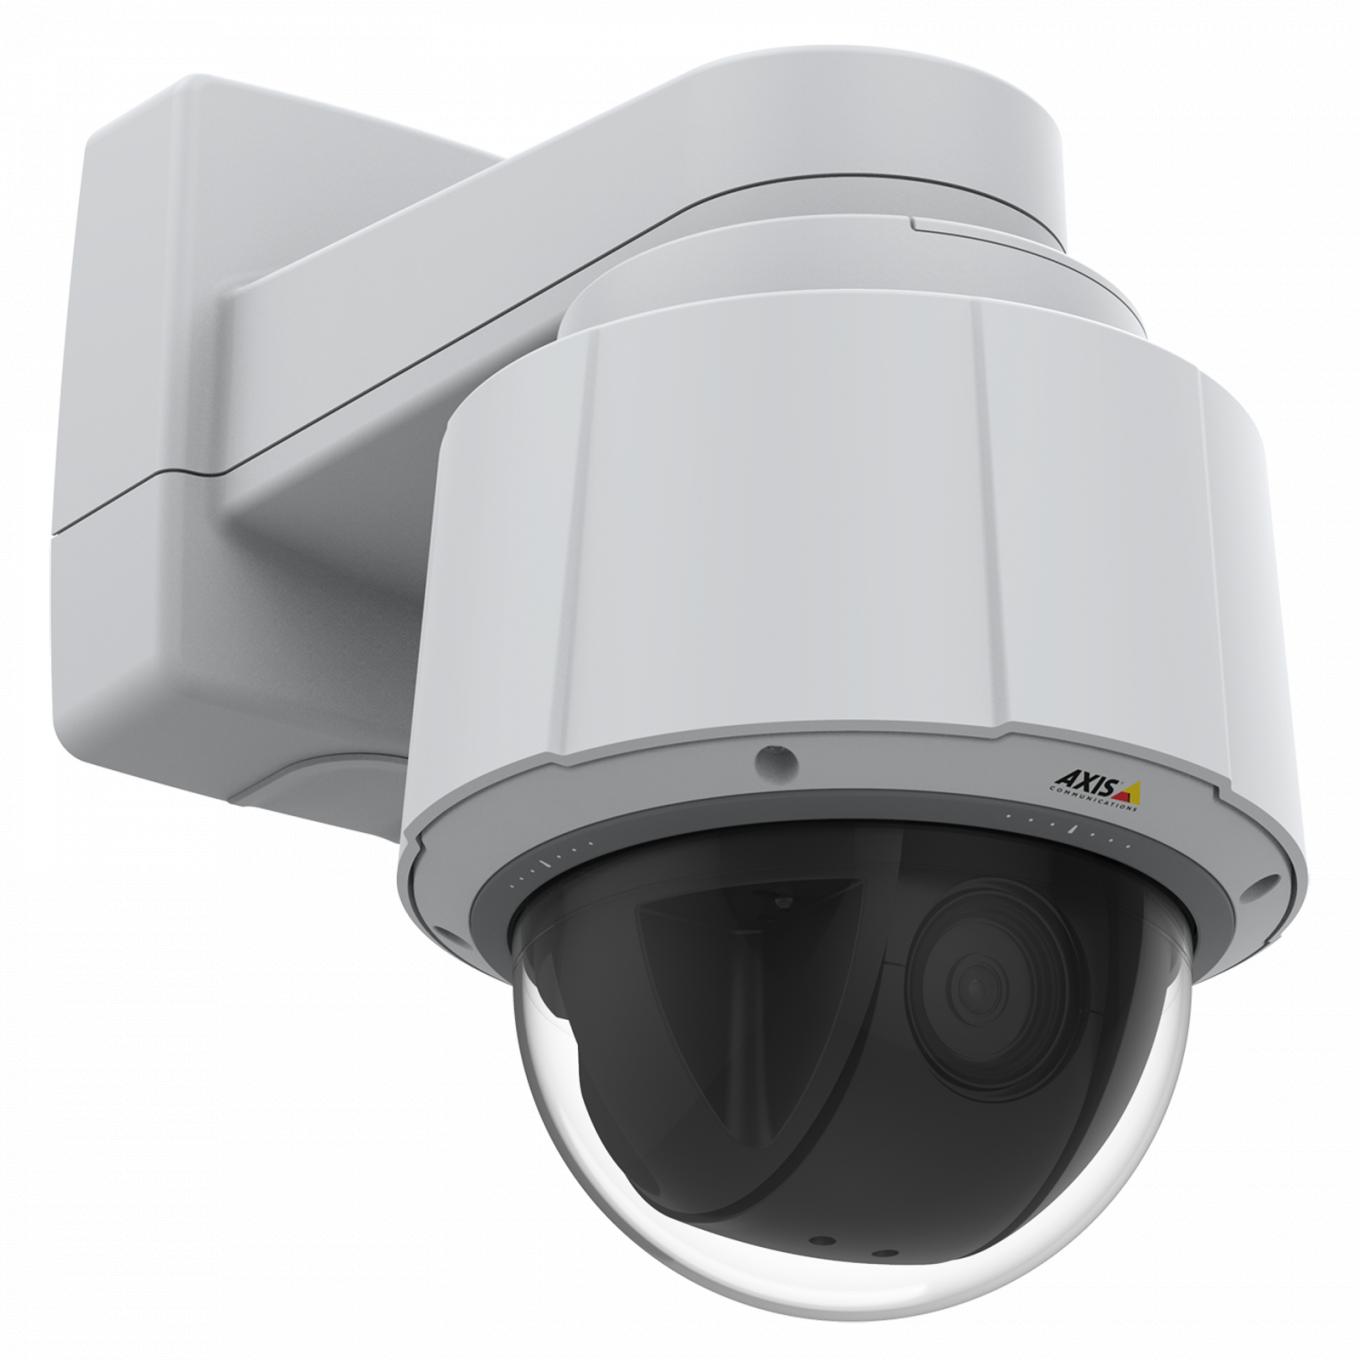 Axis IP Camera Q6075 has Indoor PTZ with HDTV 720p and 30x optical zoom